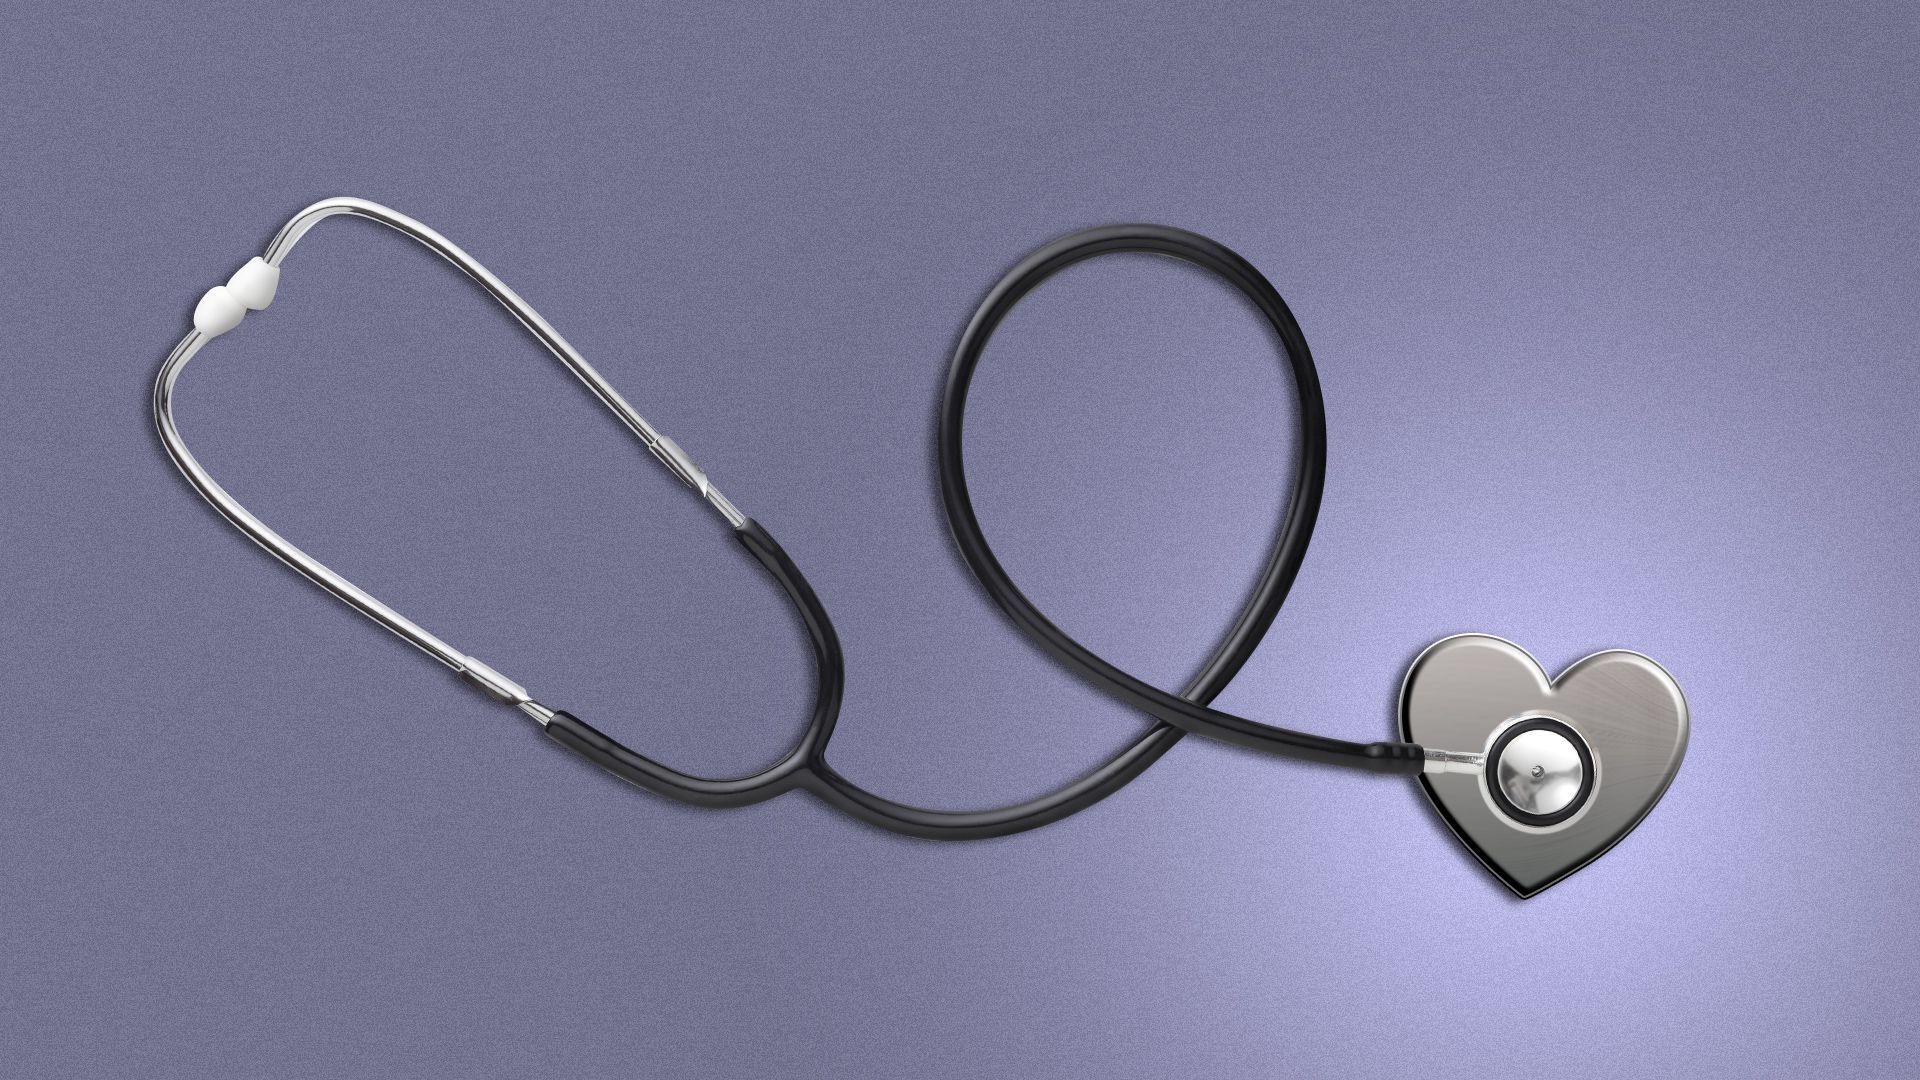 Illustration of a stethoscope with a heart as the bell. 